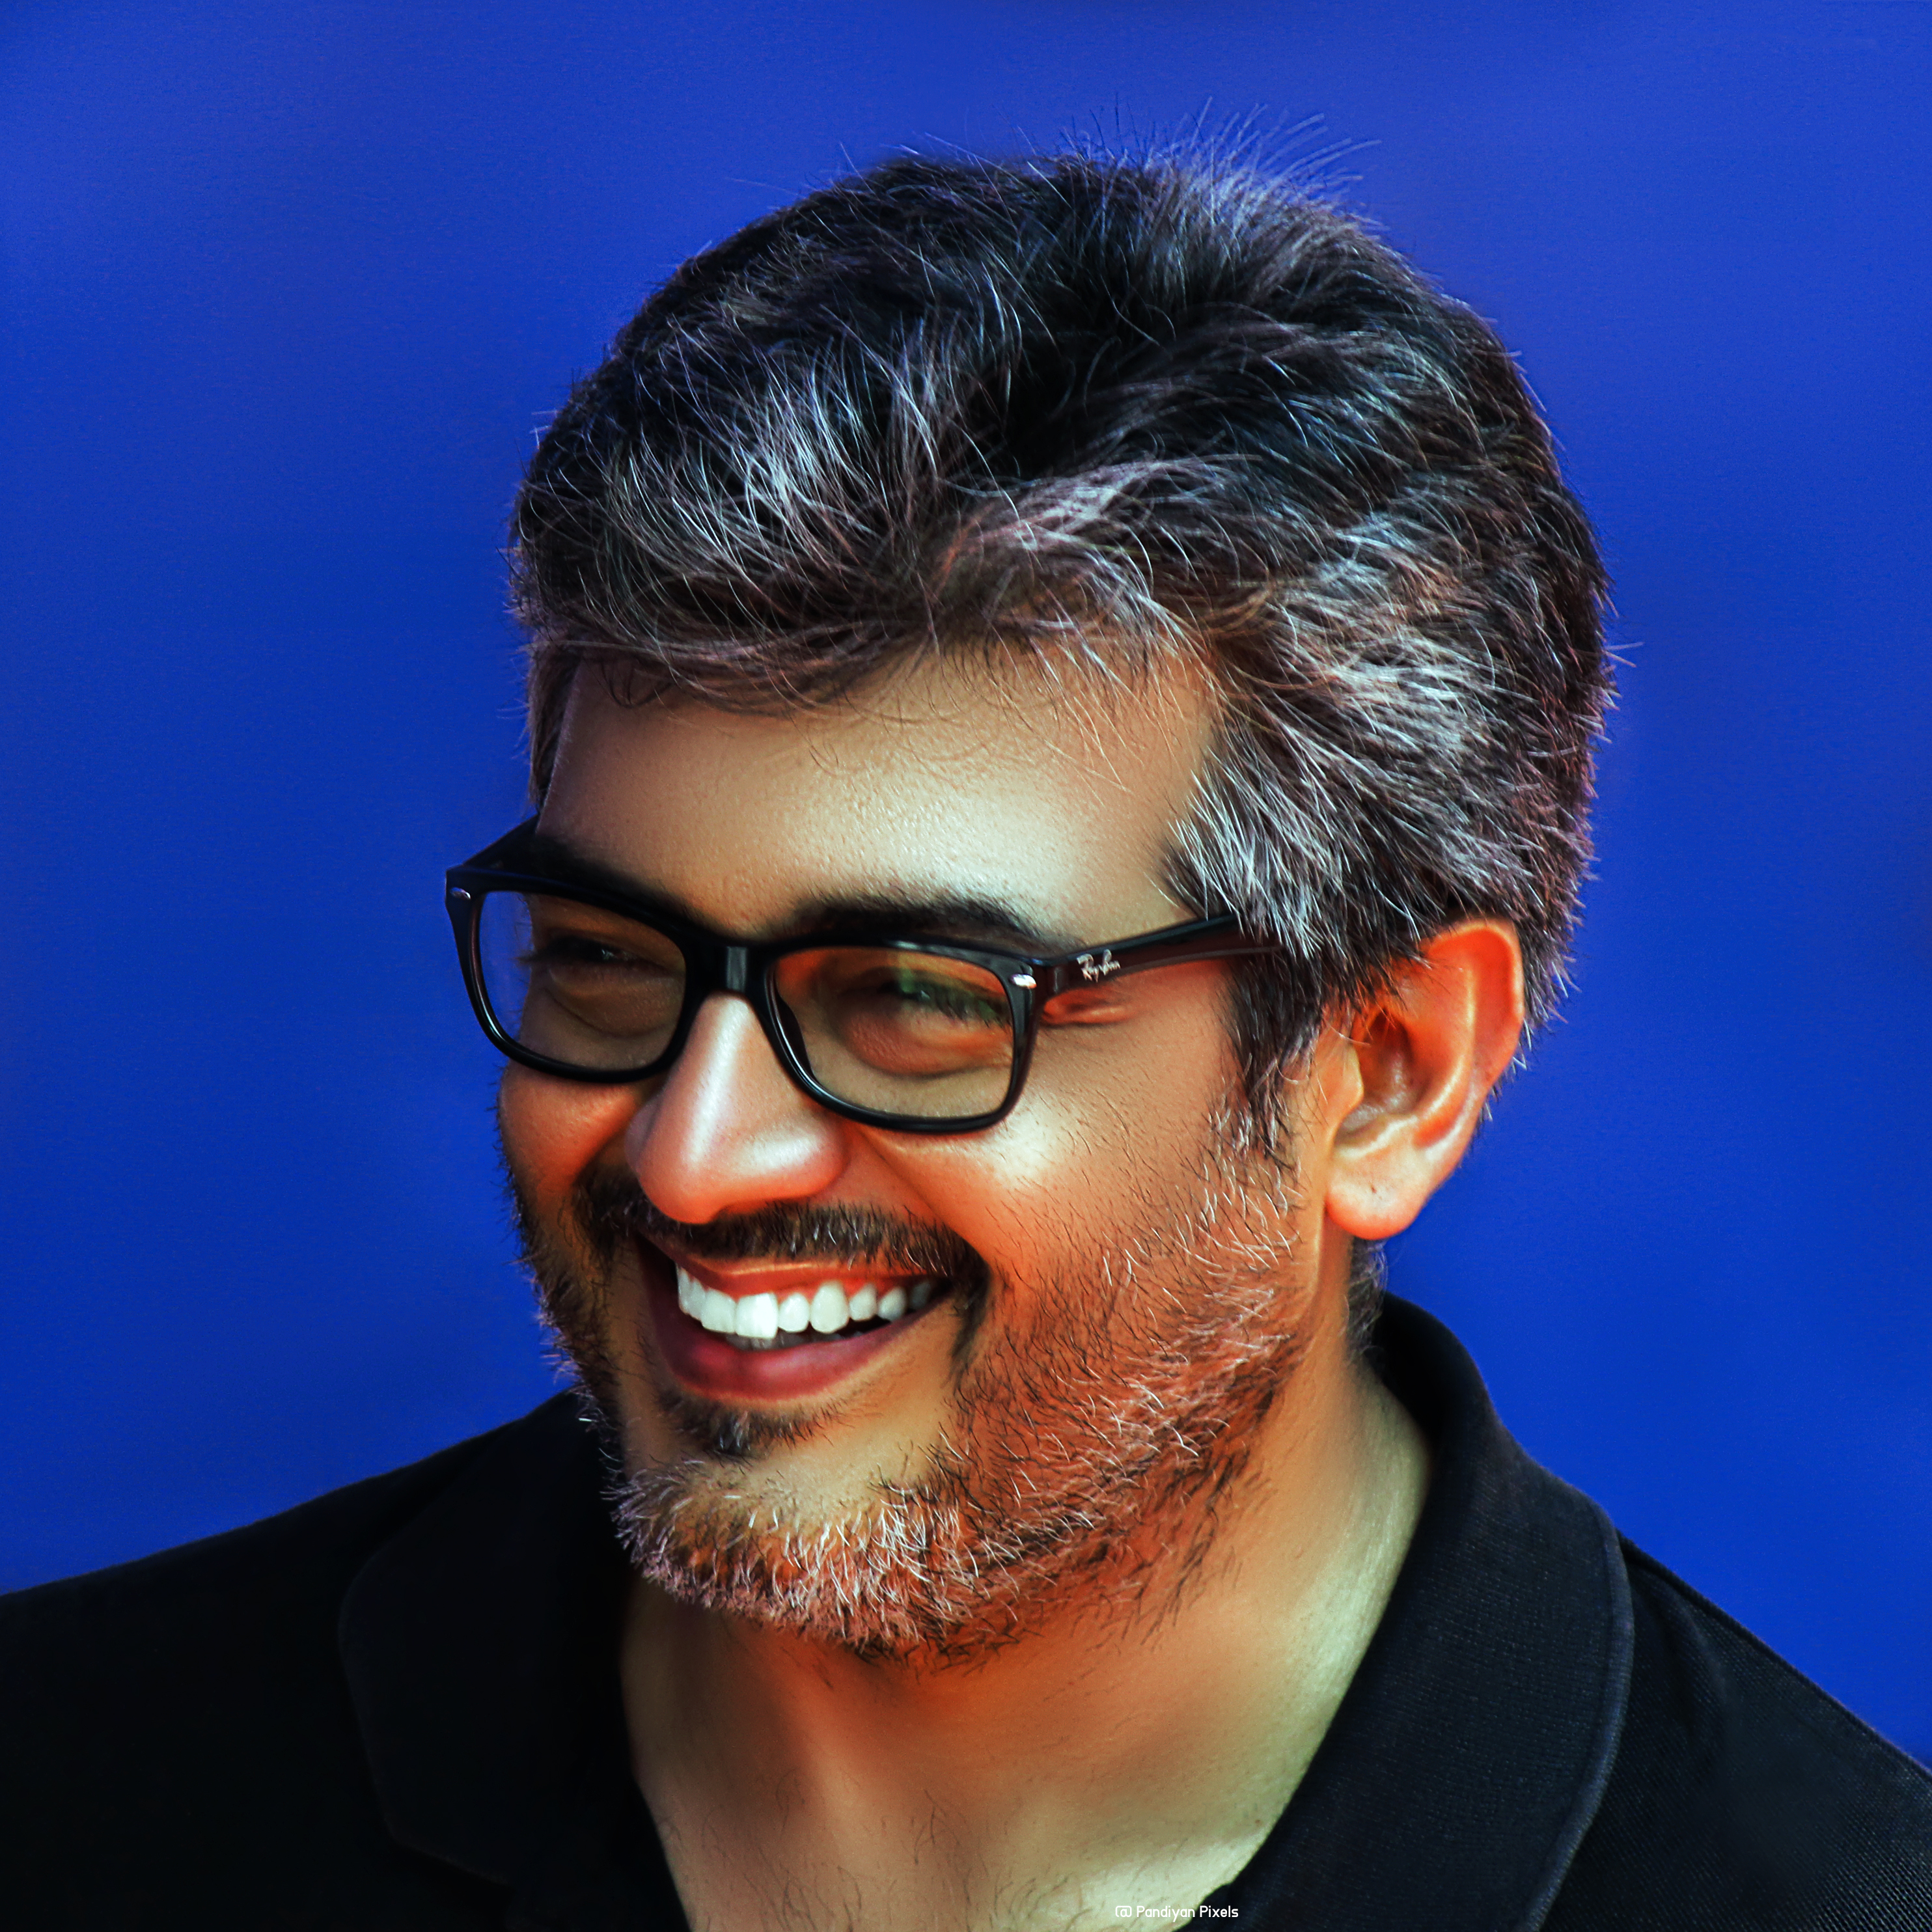 Ajith Thala60 Hairstyle Colour Changed - Young Dynamic Look in Latest Photo